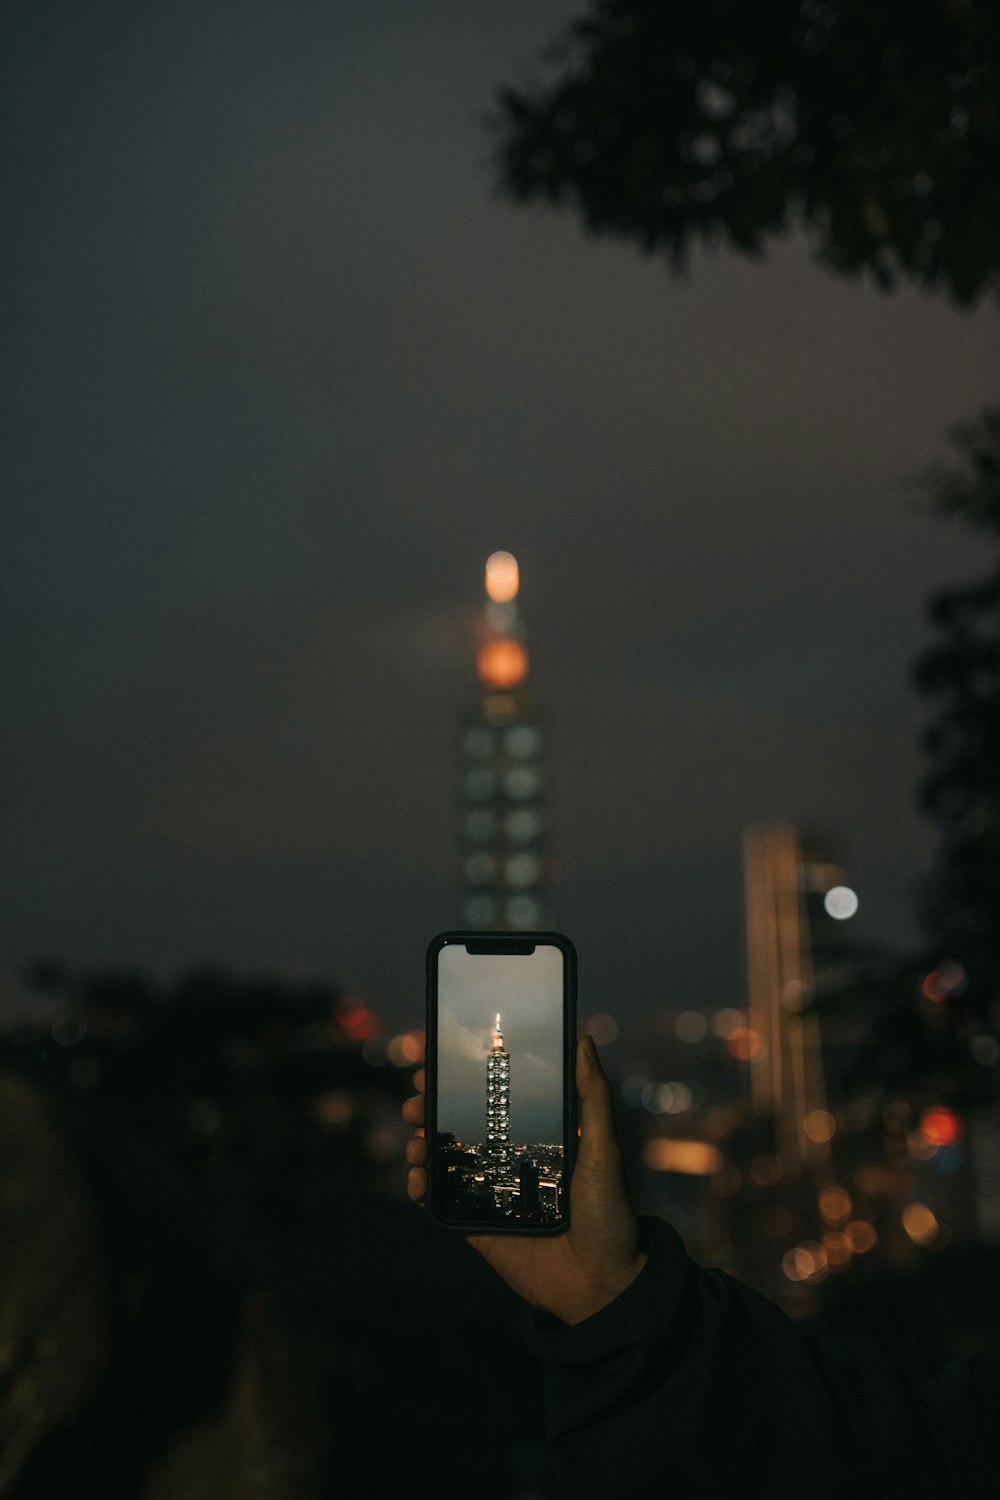 person taking photo of city lights during night time